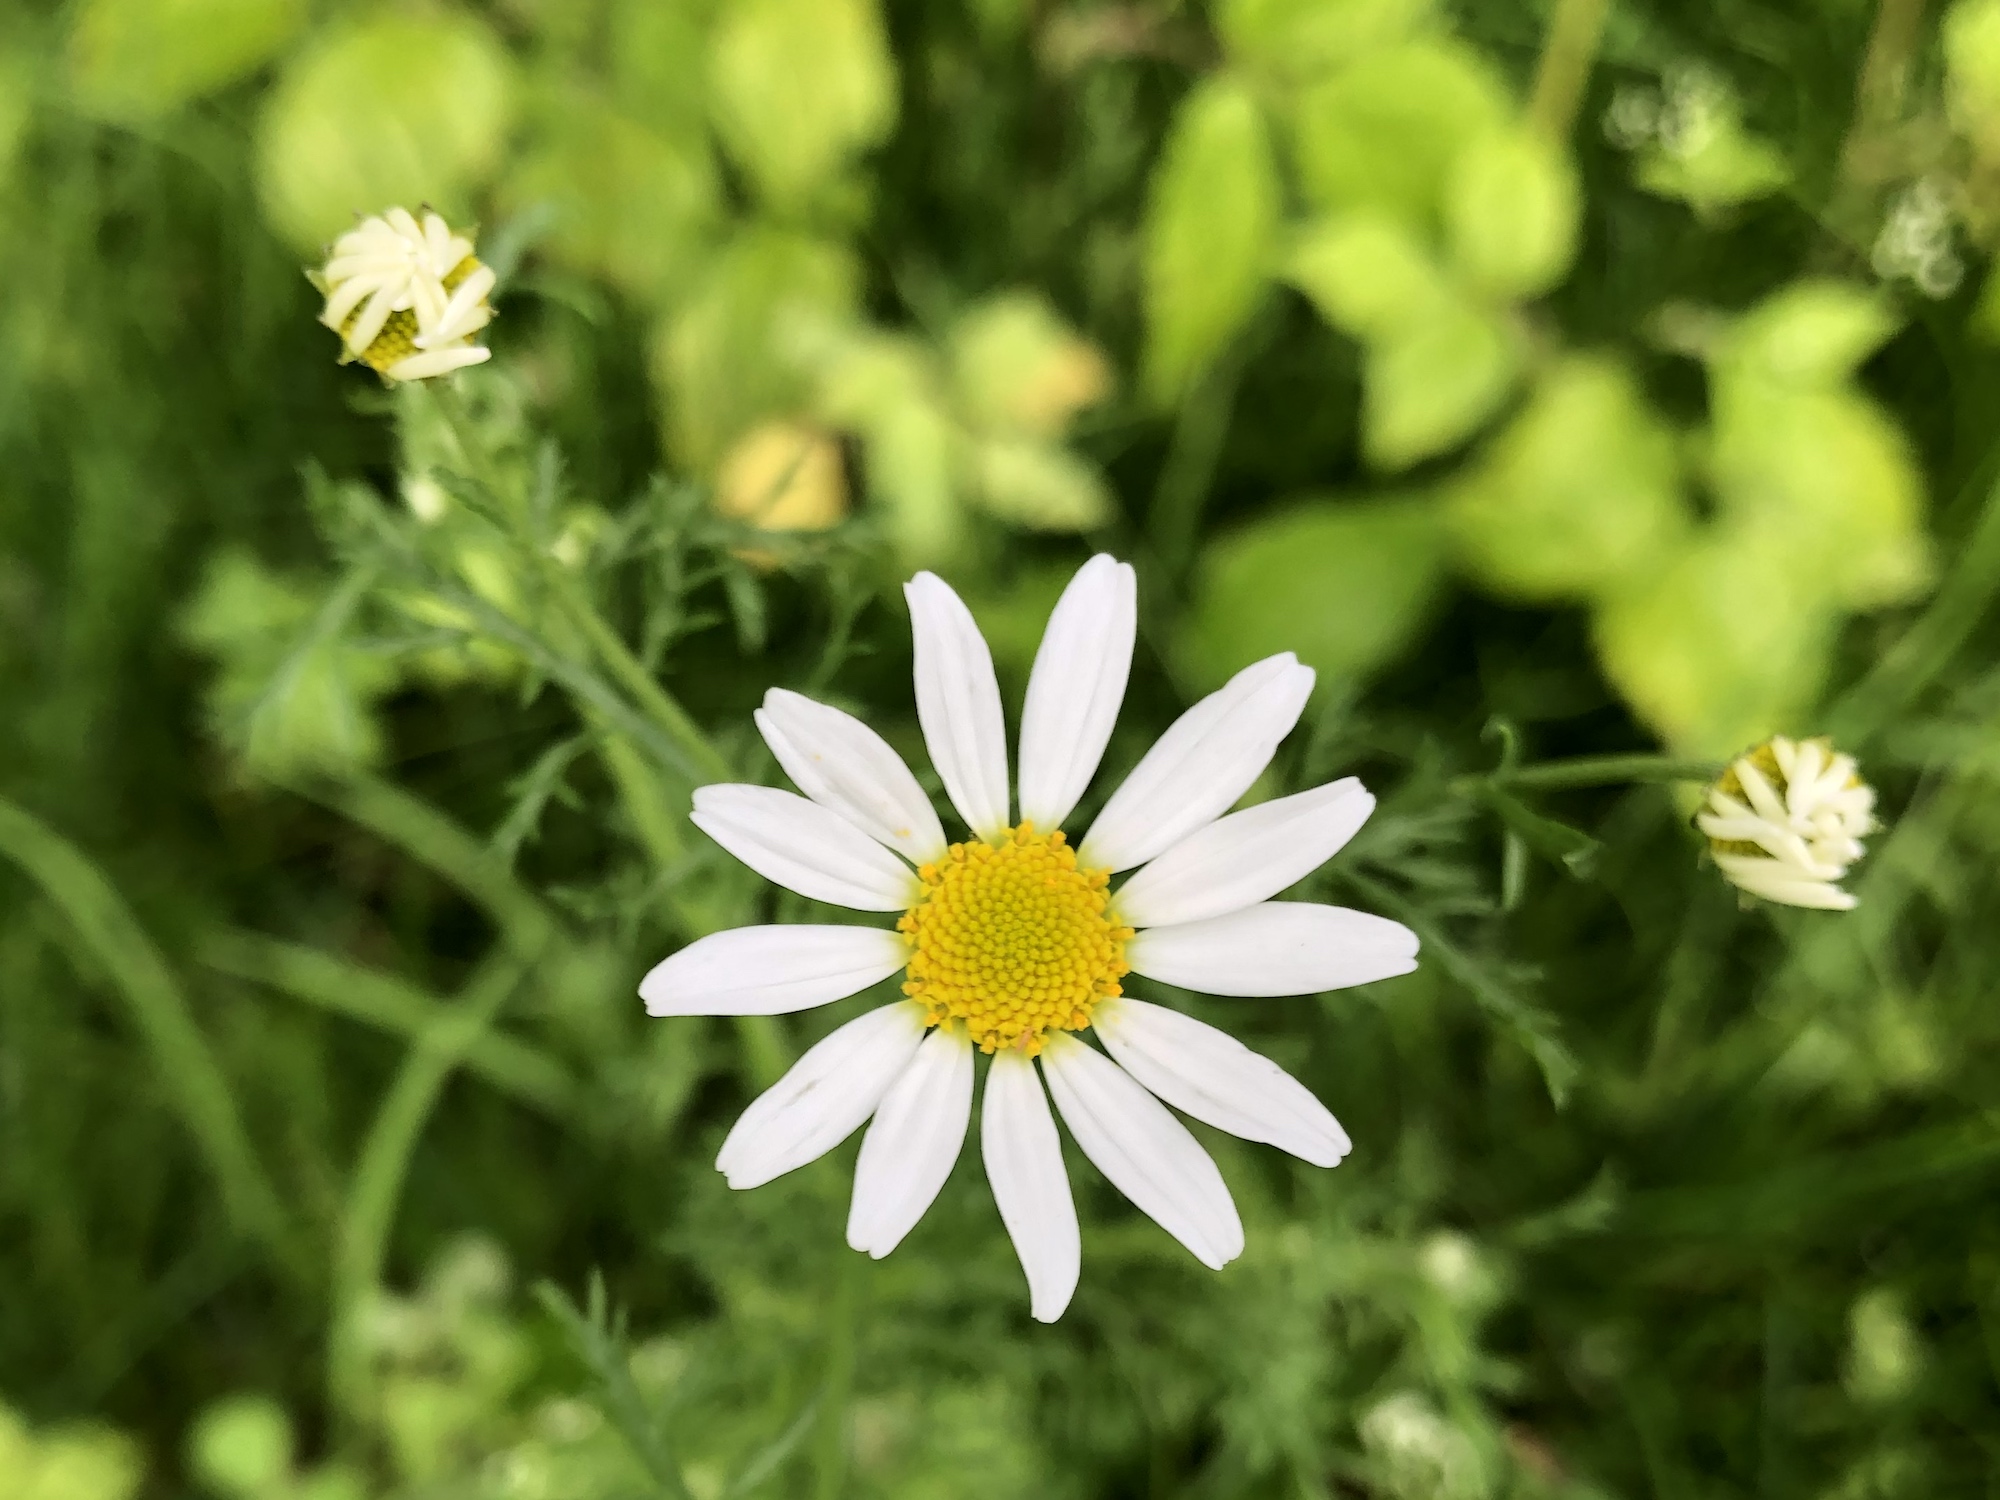 Chamomile in grass between Monroe Street sidewalk and Marion Dunn woods in Madison, Wisconsin on July 1, 2019.